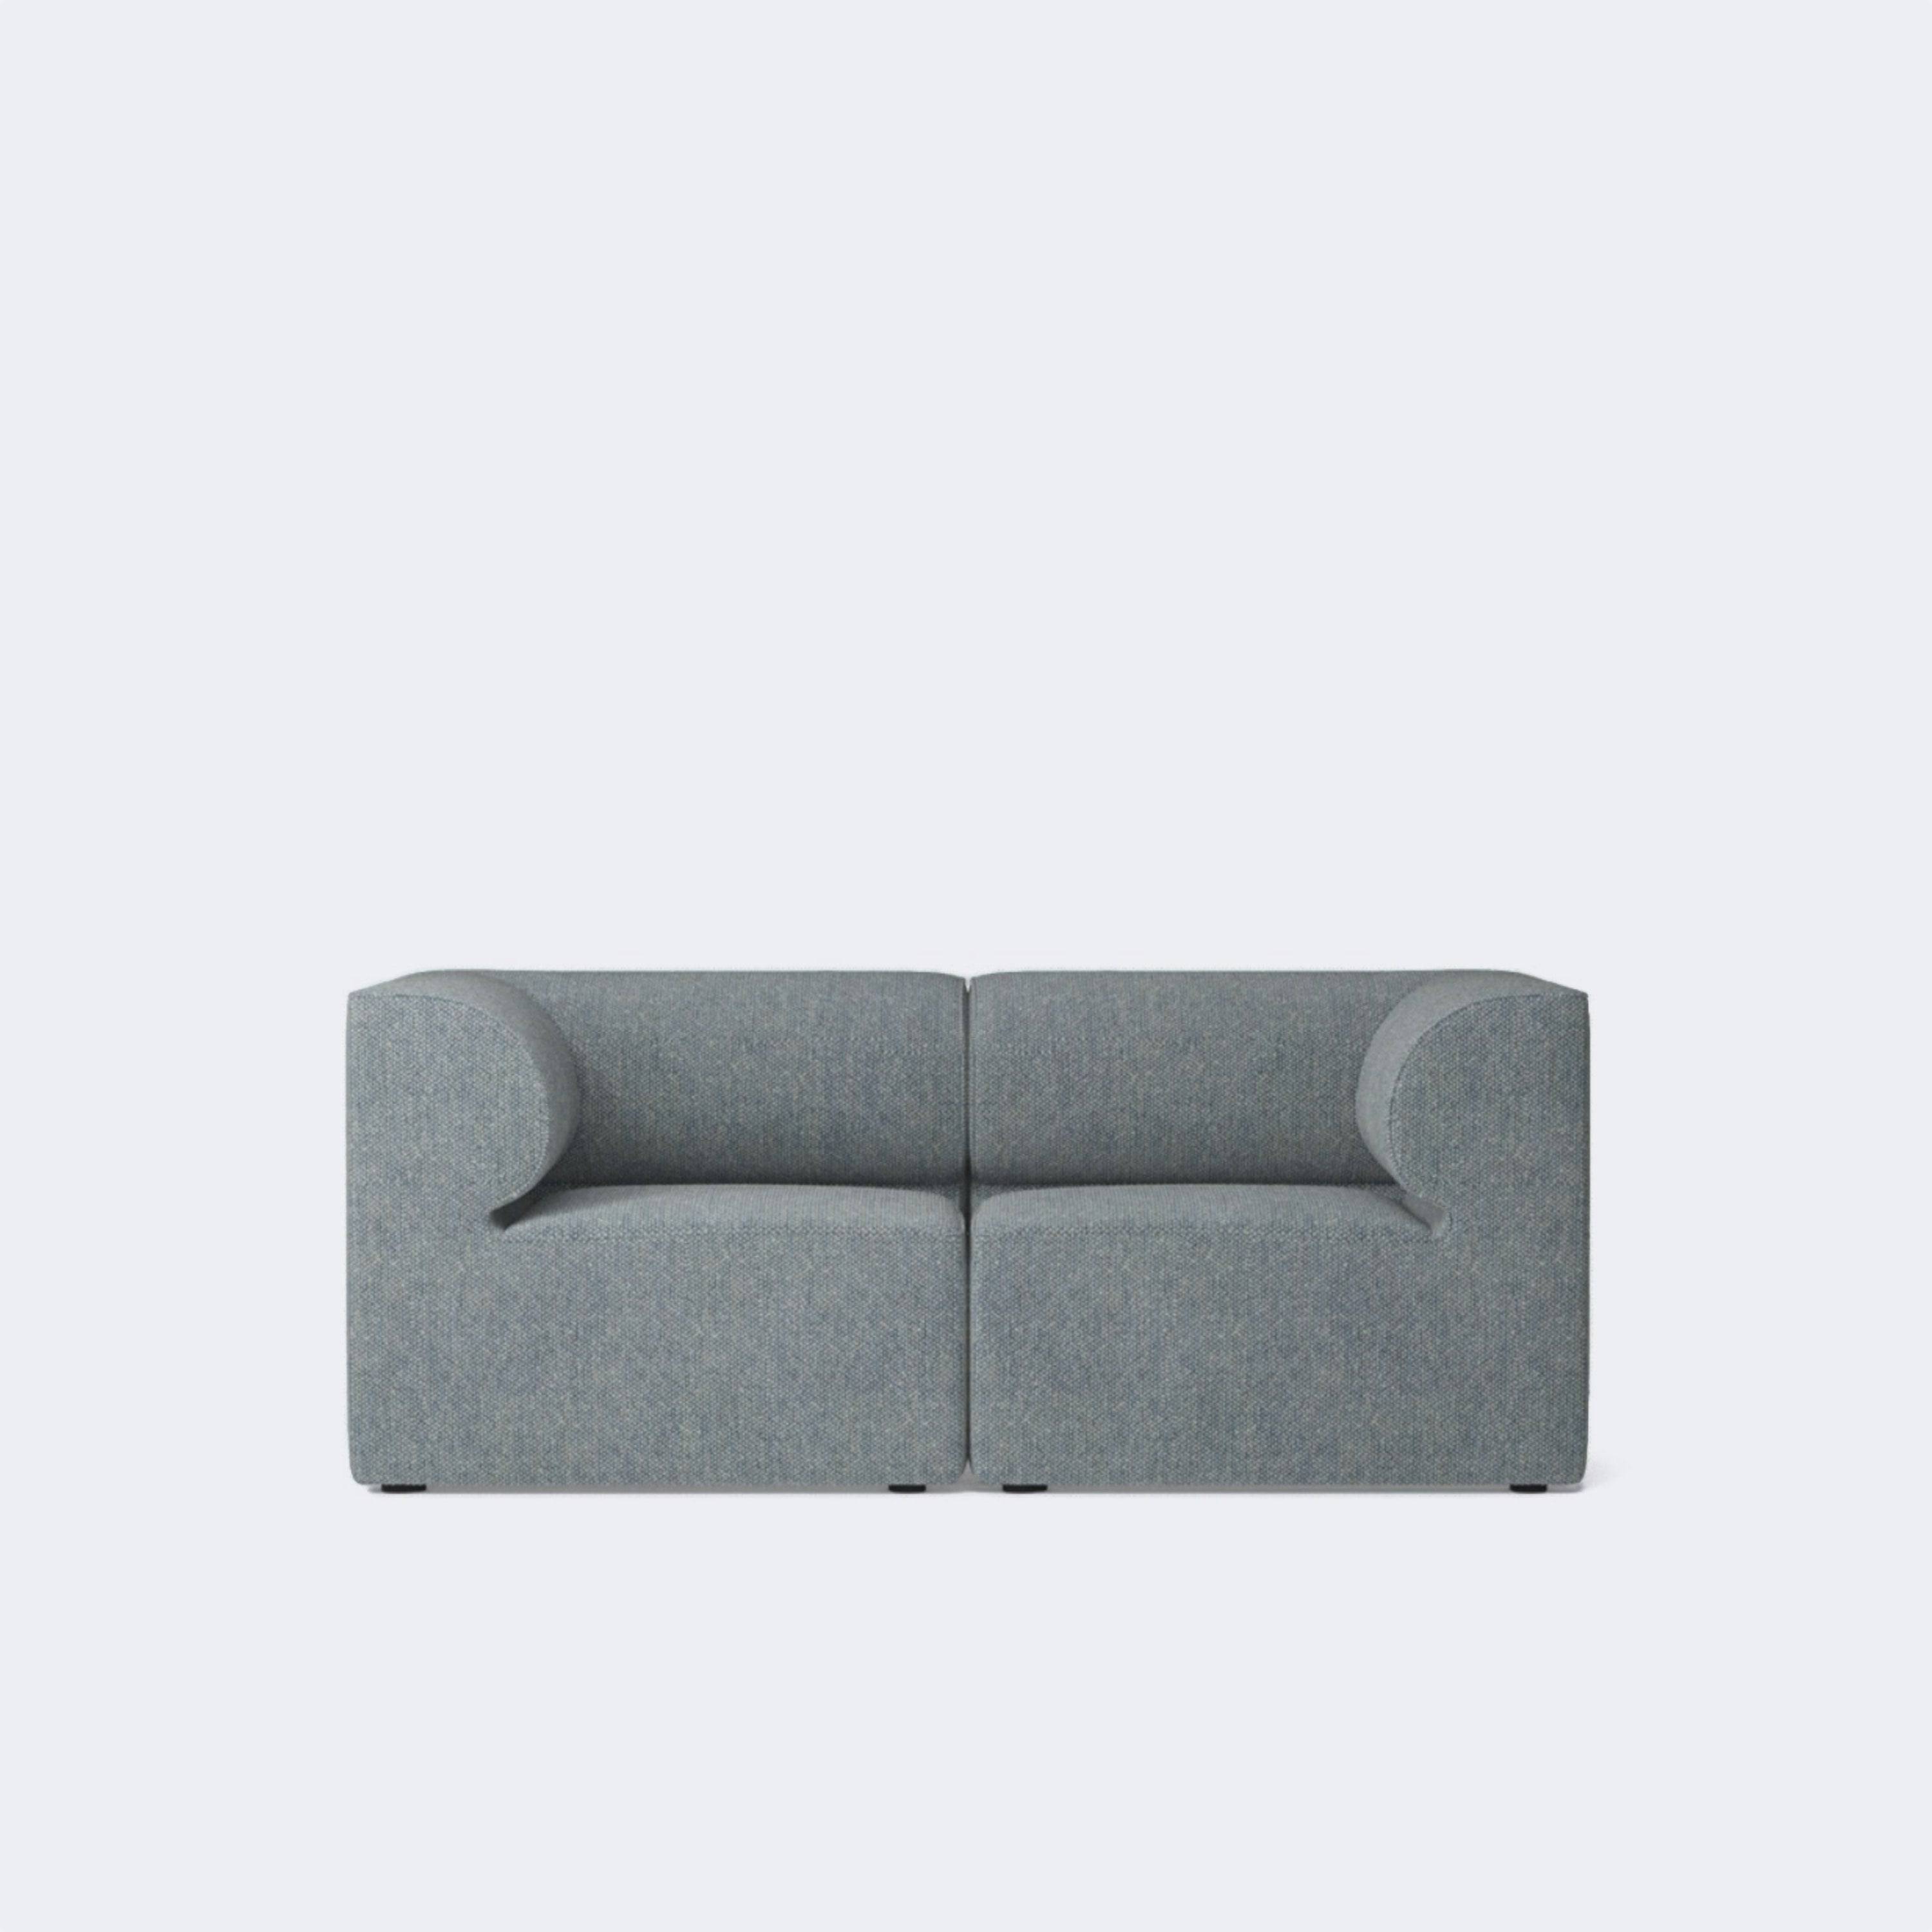 Audo Copenhagen Eave Sofa, 2-Seater Made To Order (10-12 Weeks) Safire #012 - KANSO